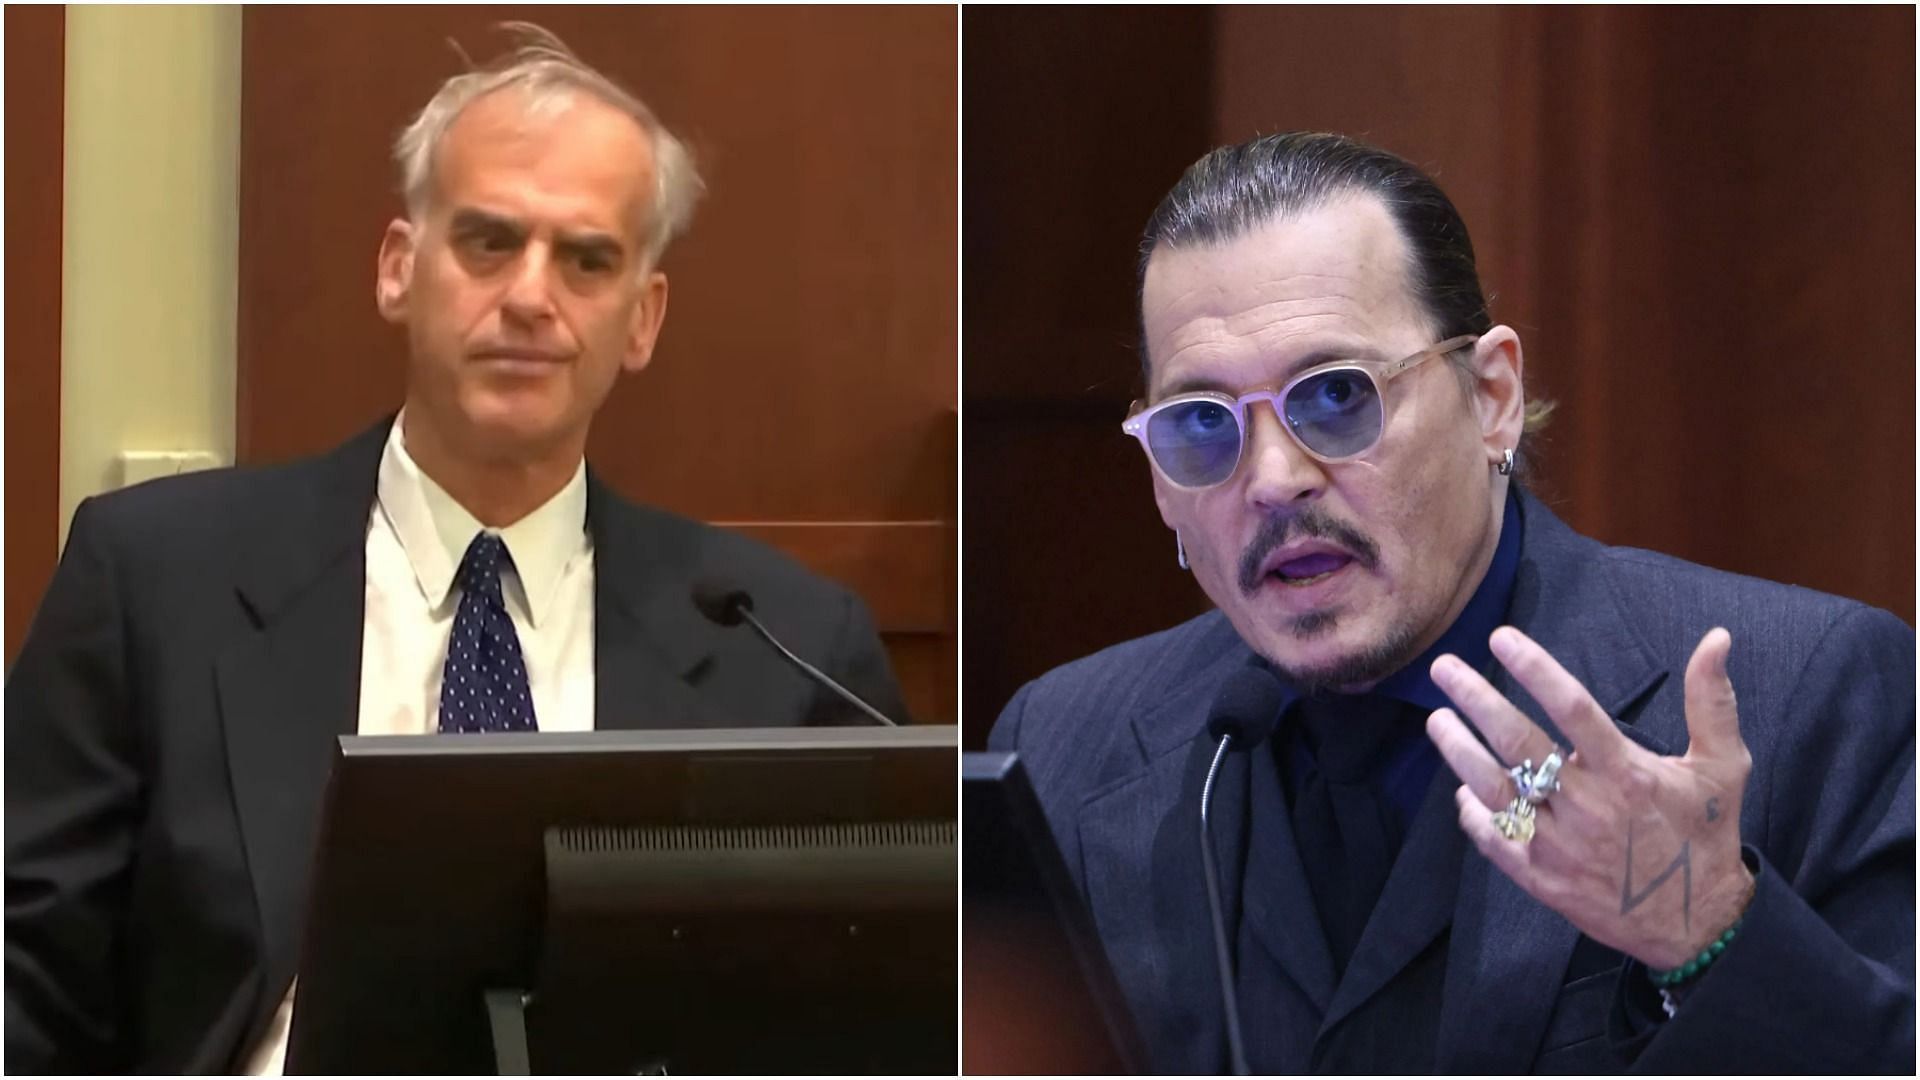 Dr. David Spiegel and Johnny Depp in the trial (Image via Law&amp;Crime Network/YouTube, and Jim Lo Scalzo/POOL/AFP/Getty Images)